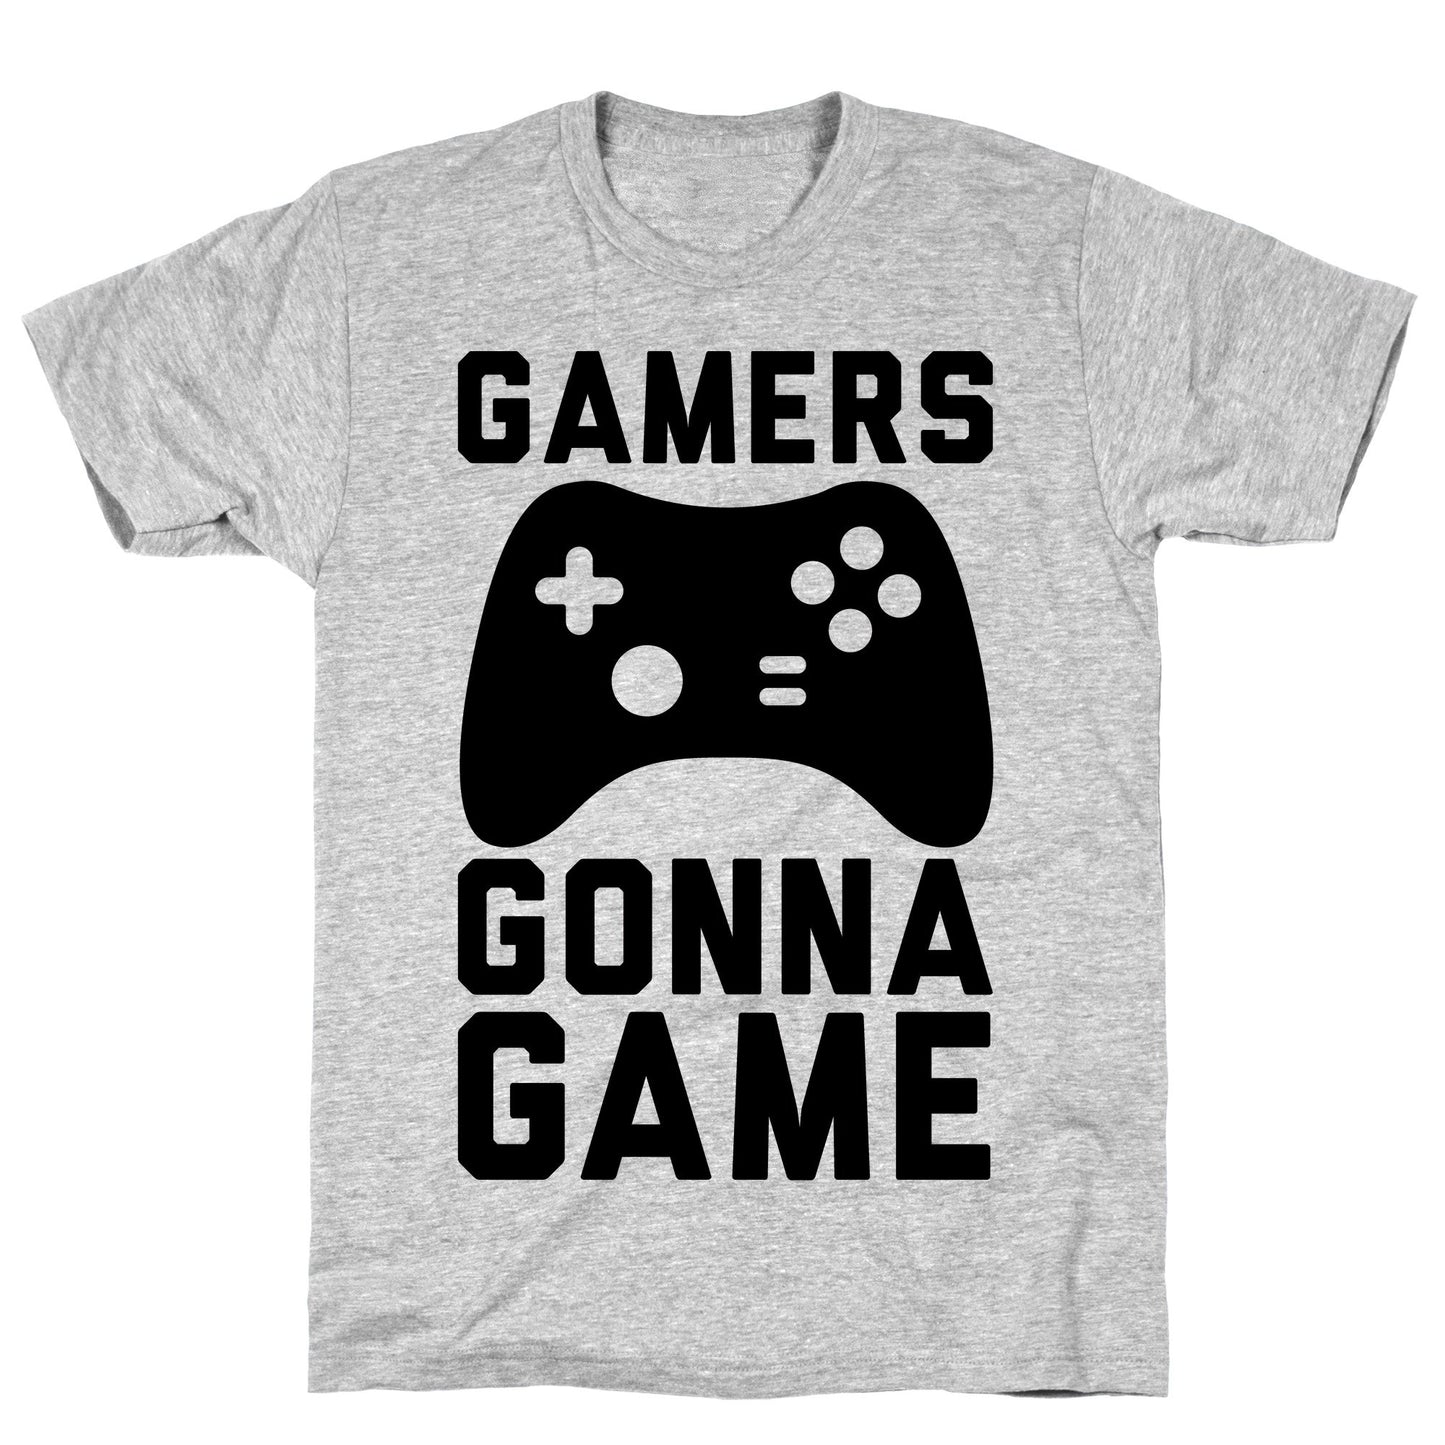 Gamers Gonna Game Athletic Gray Unisex Cotton Tee